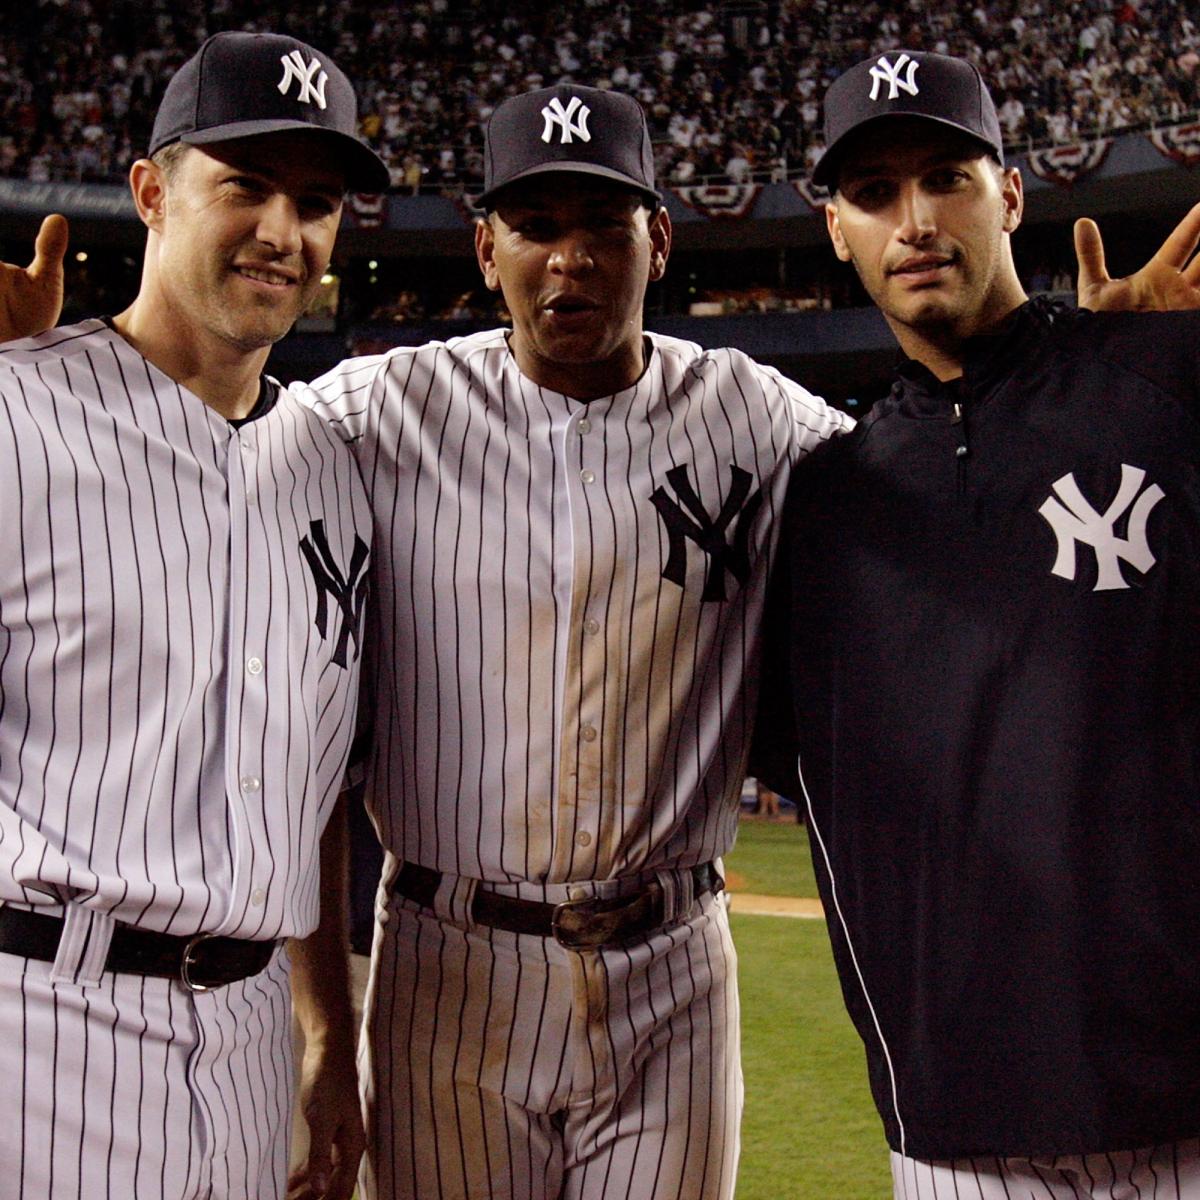 Ranking the New York Yankees' 10 Best Players in the Last 10 Years